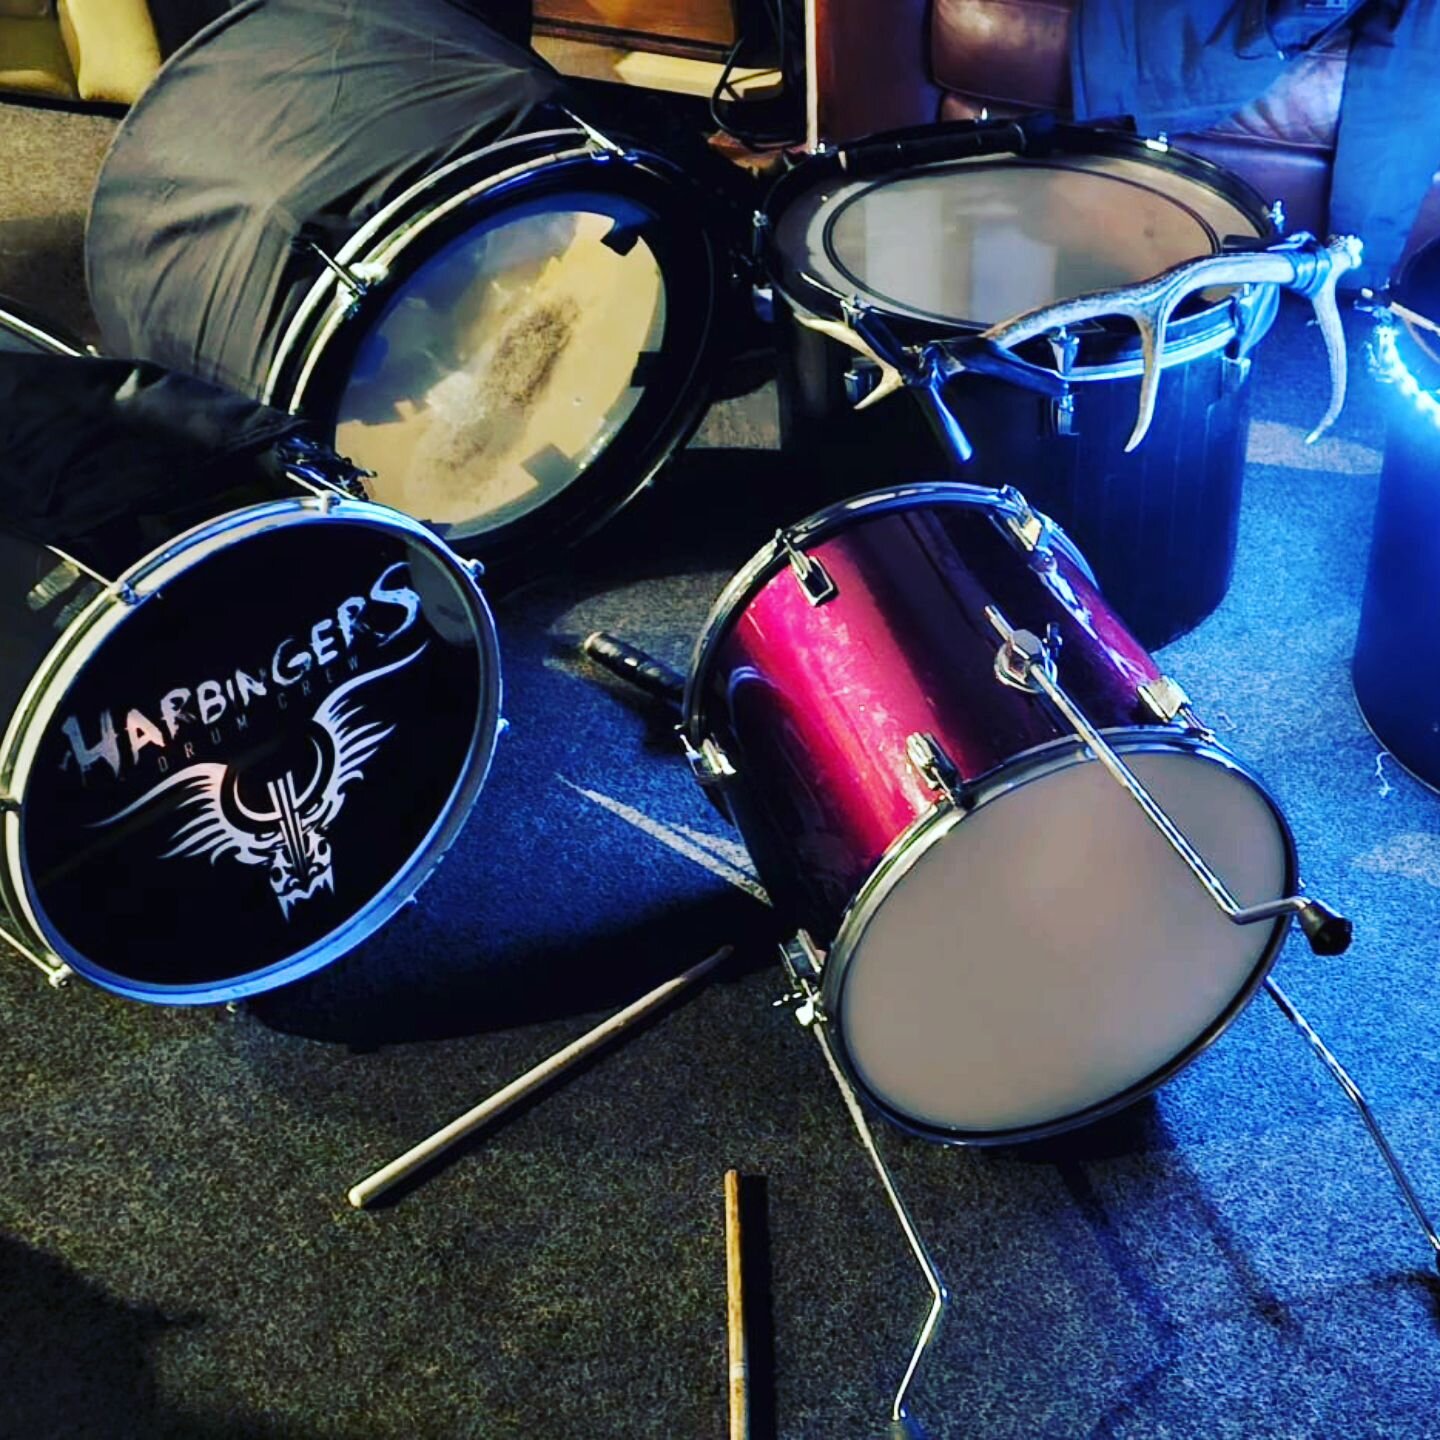 Gig planning is firmly underway, we're looking at quite an exciting few months ahead already, but if you fancy putting us on a bill or having us play your event then get in touch at contact@harbingersdrumcrew.com